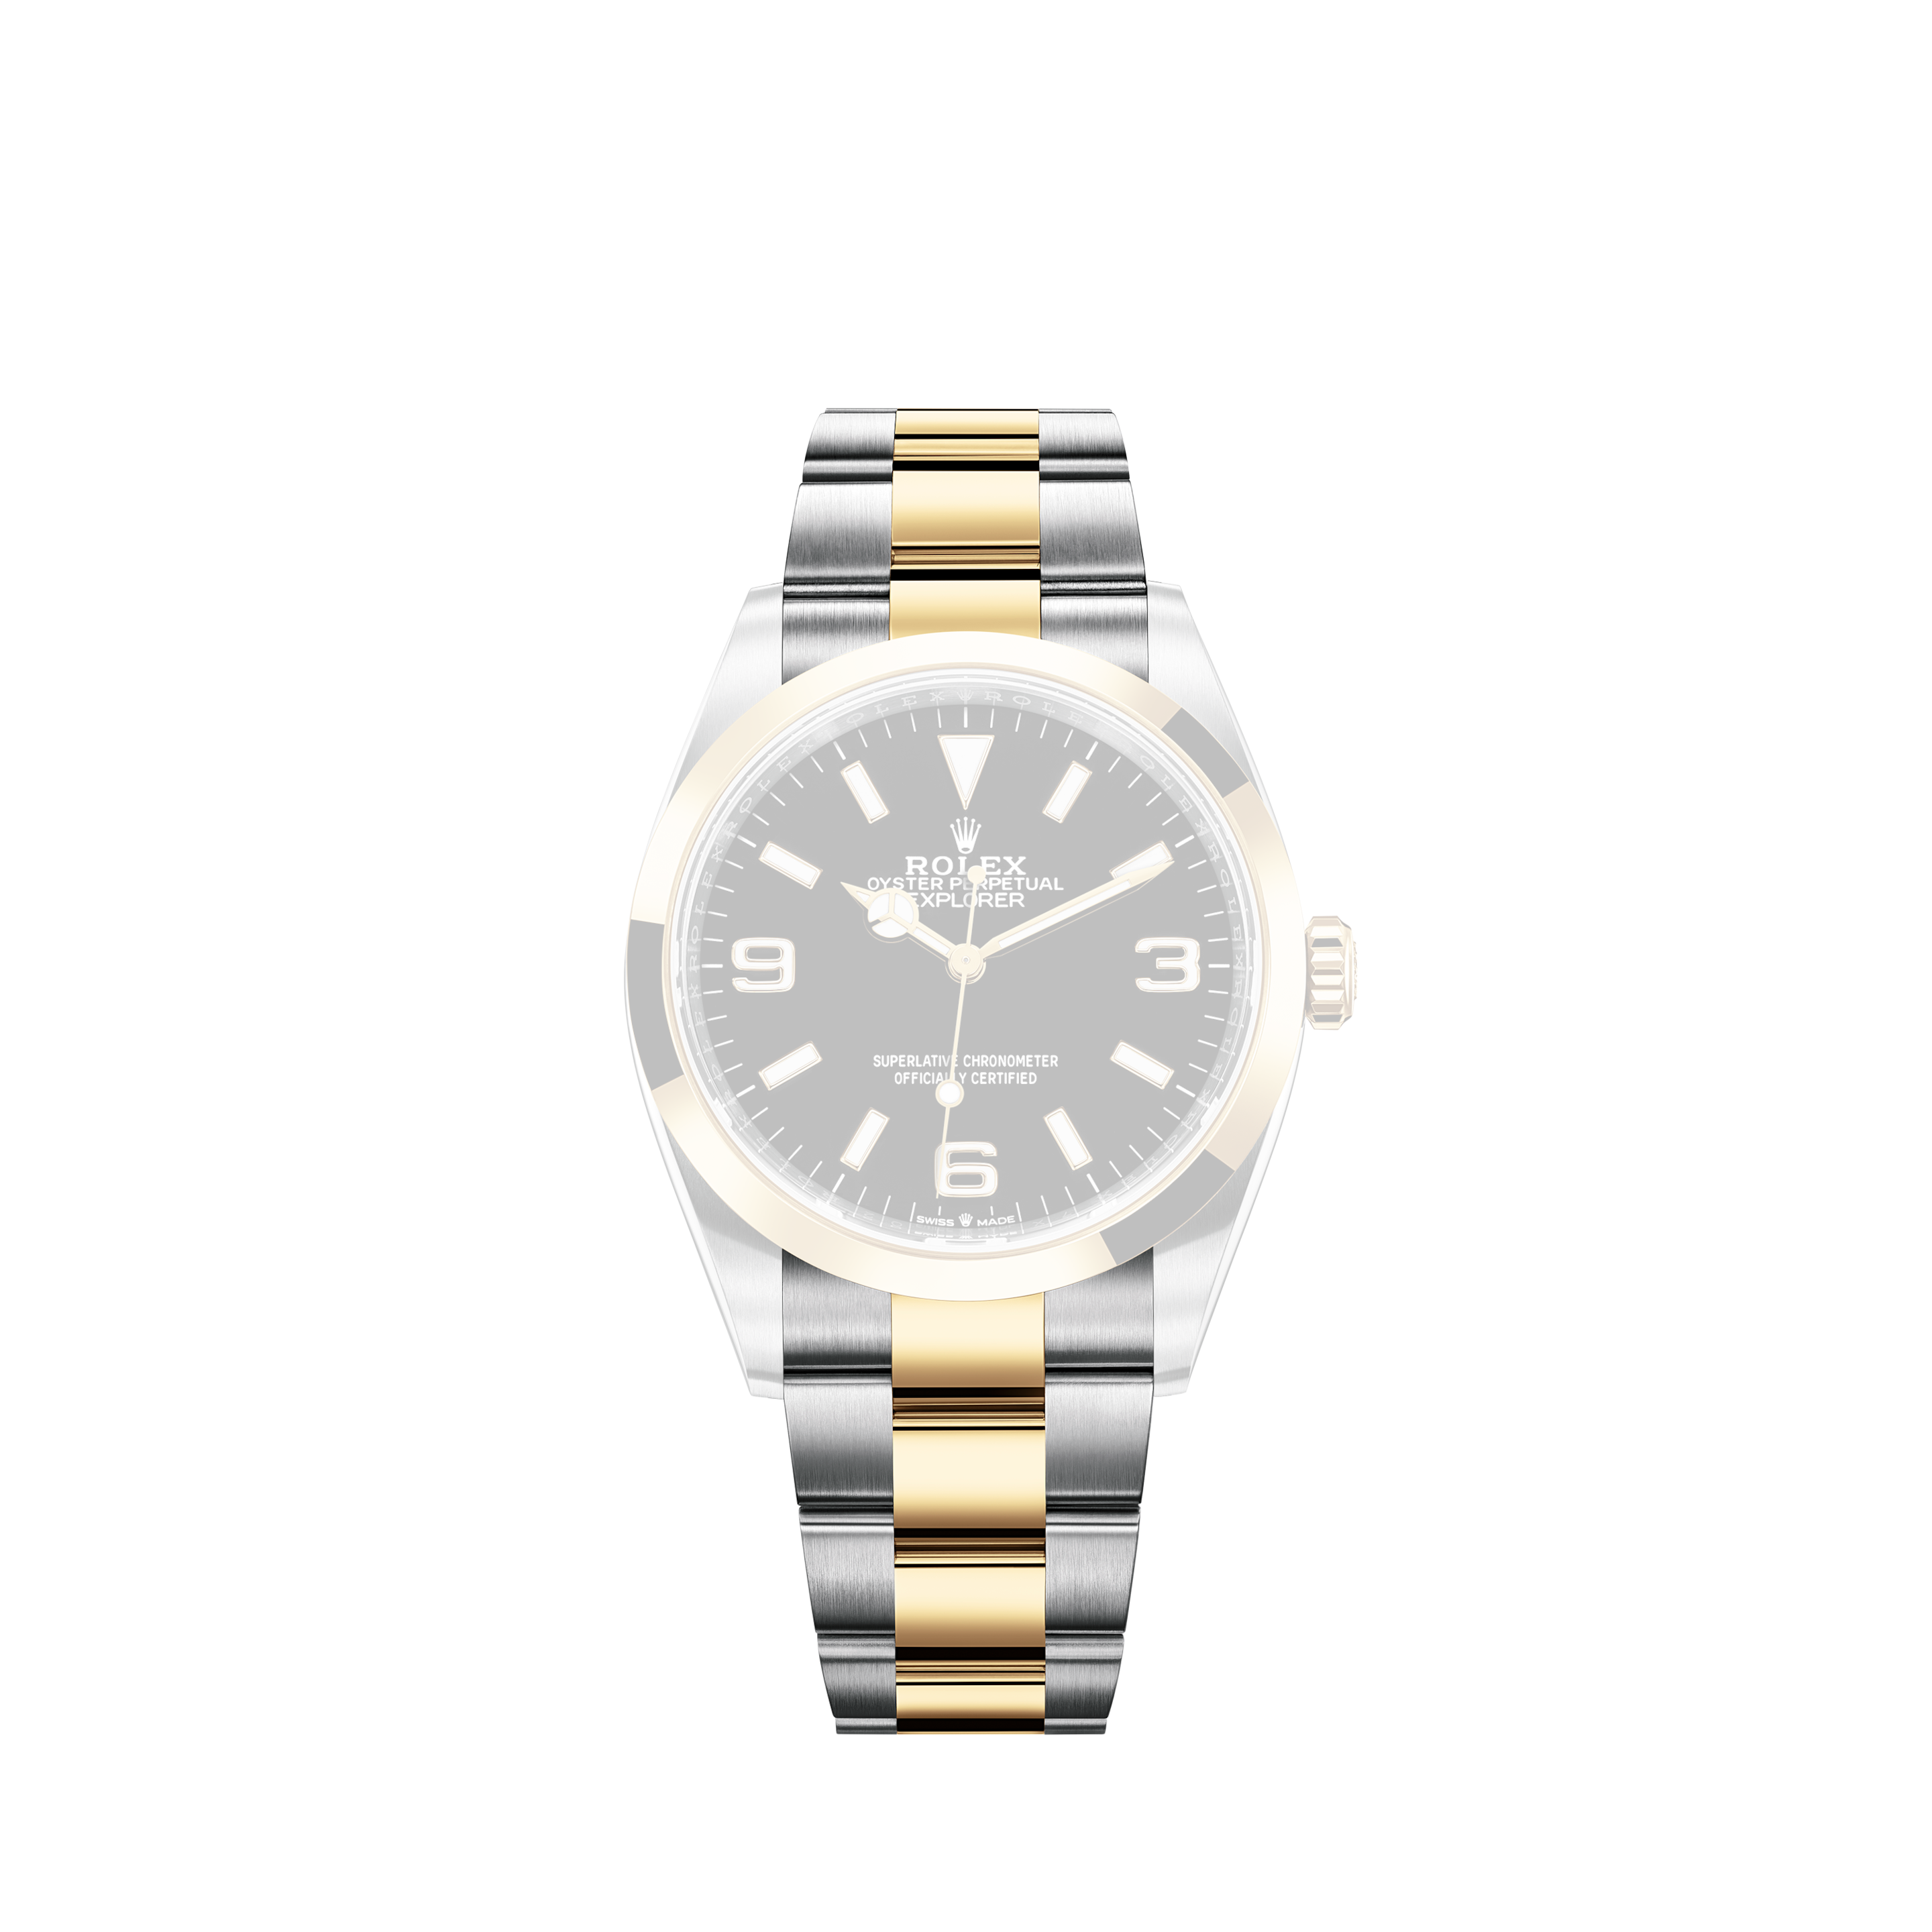 Rolex Oyster Perpetual Lady Date watch + service card